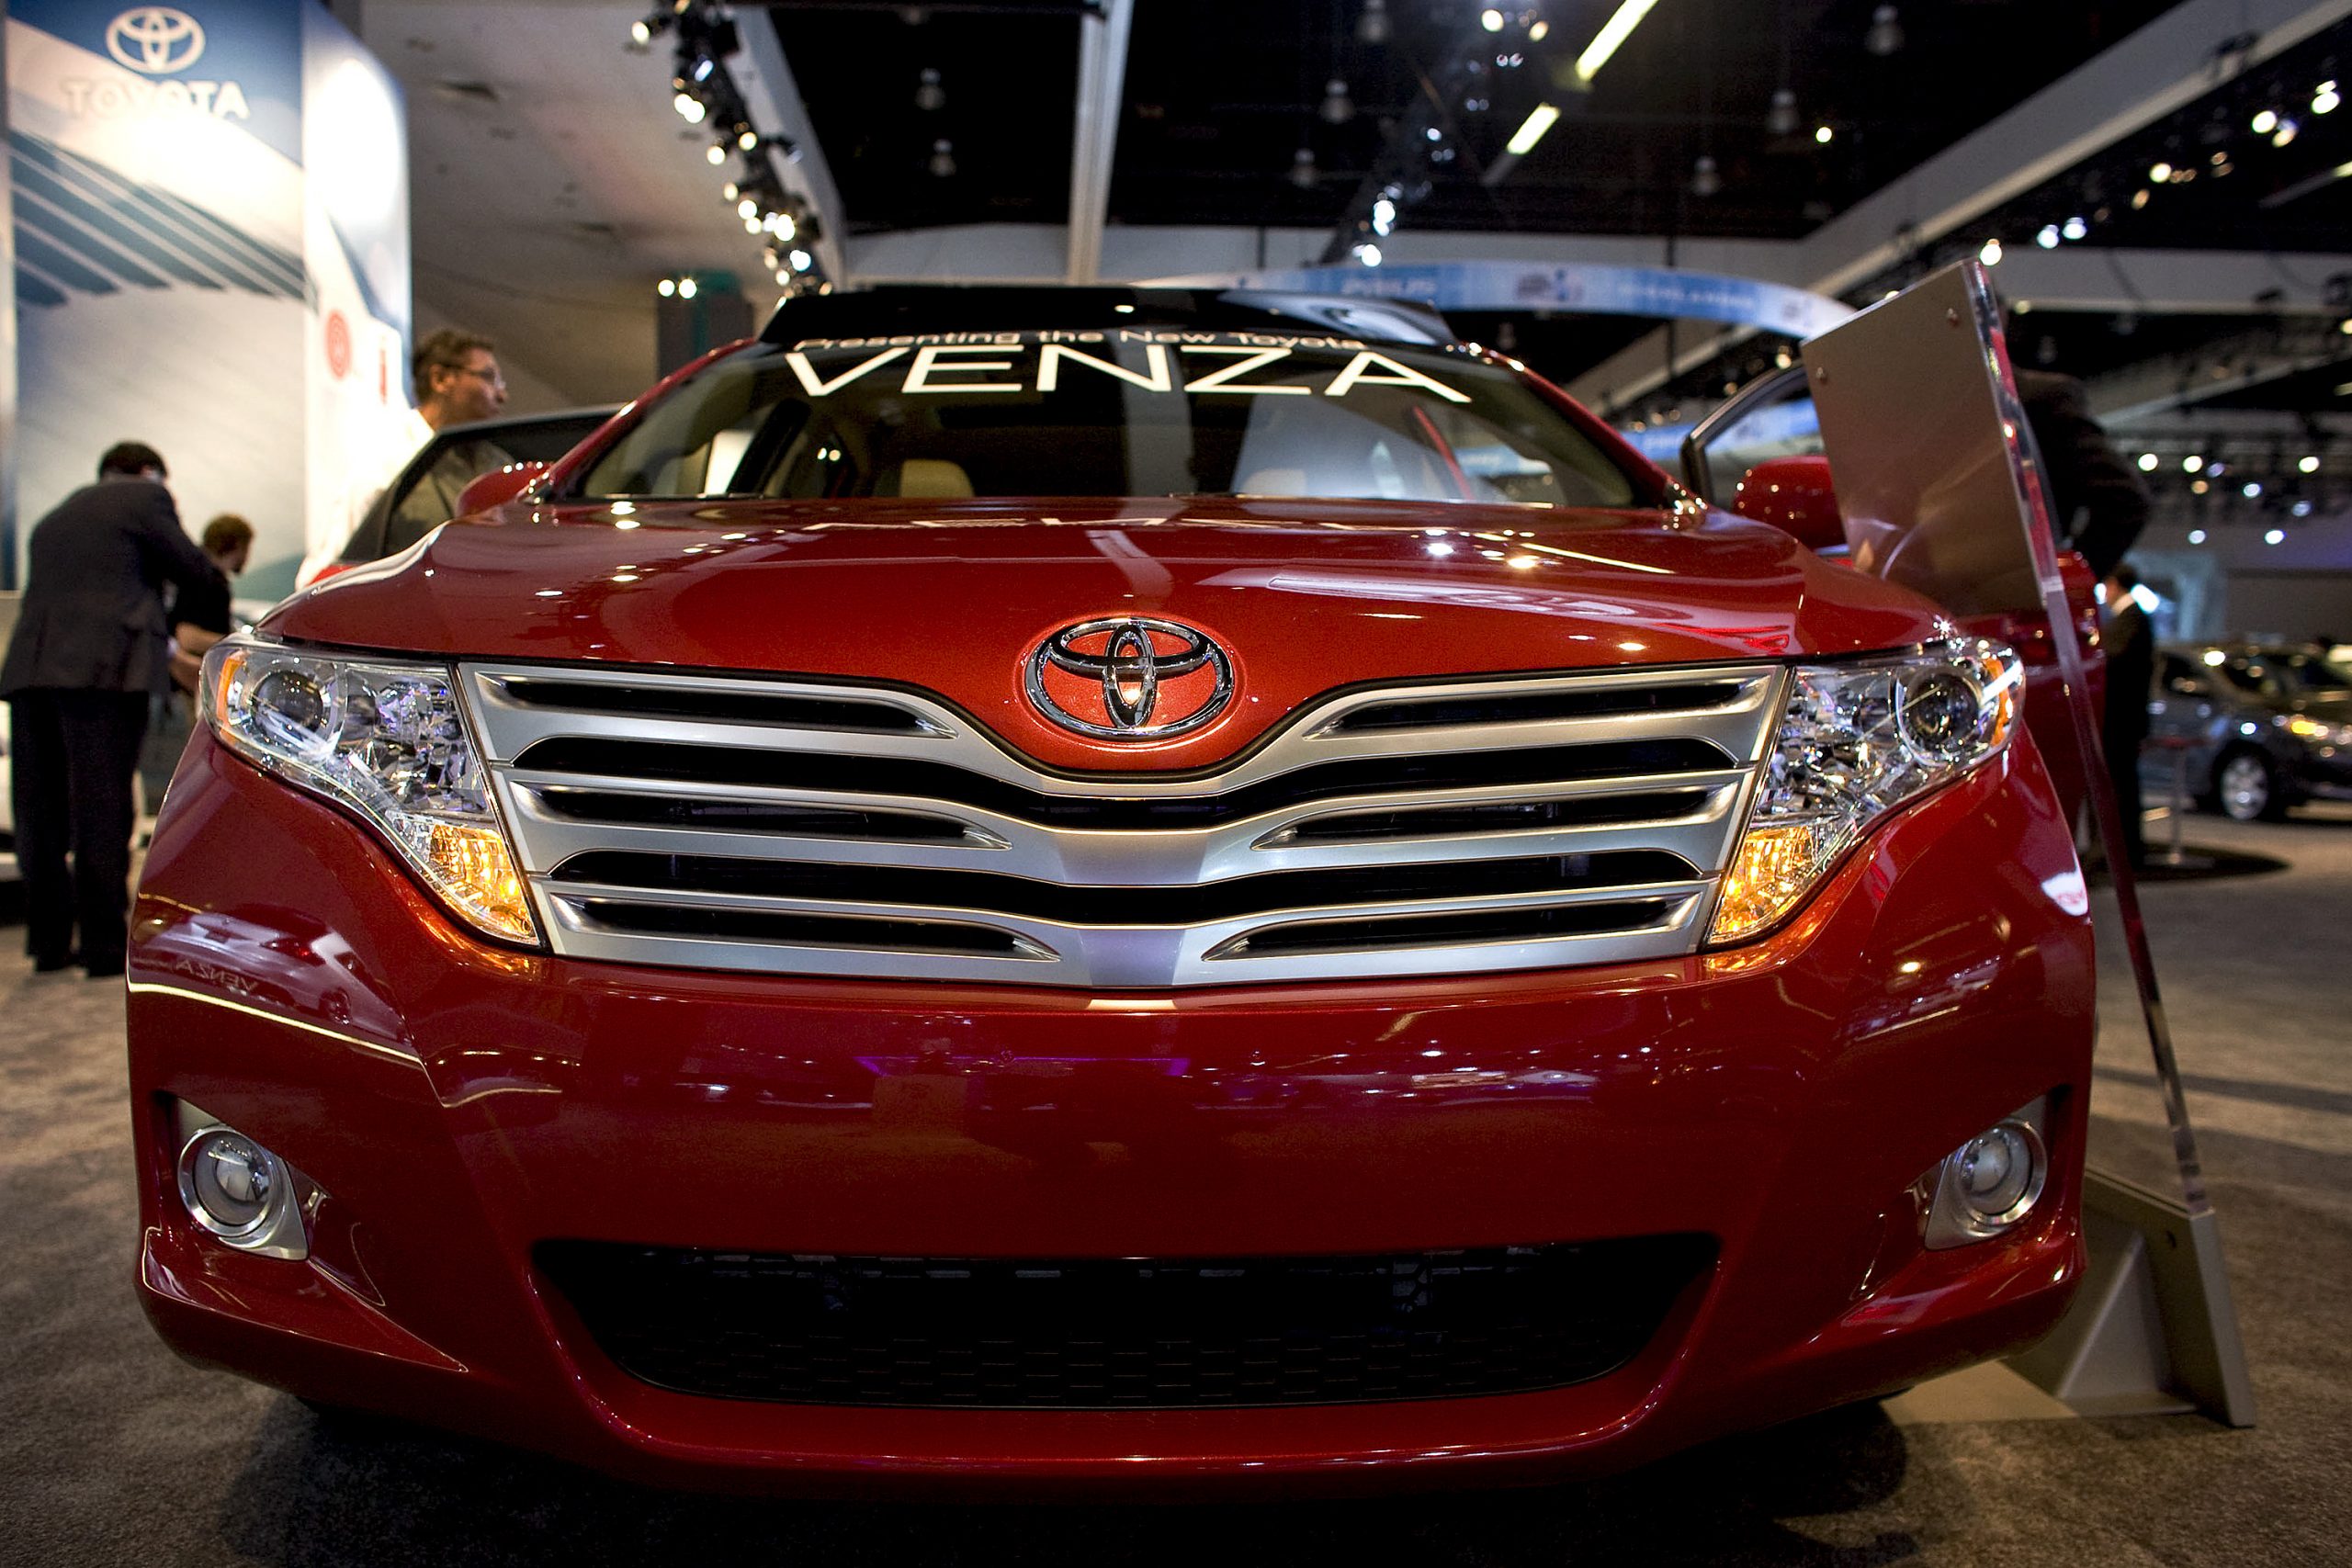 A red Toyota Venza is displayed at the LA Auto Show in Los Angeles, California November 20, 2008.